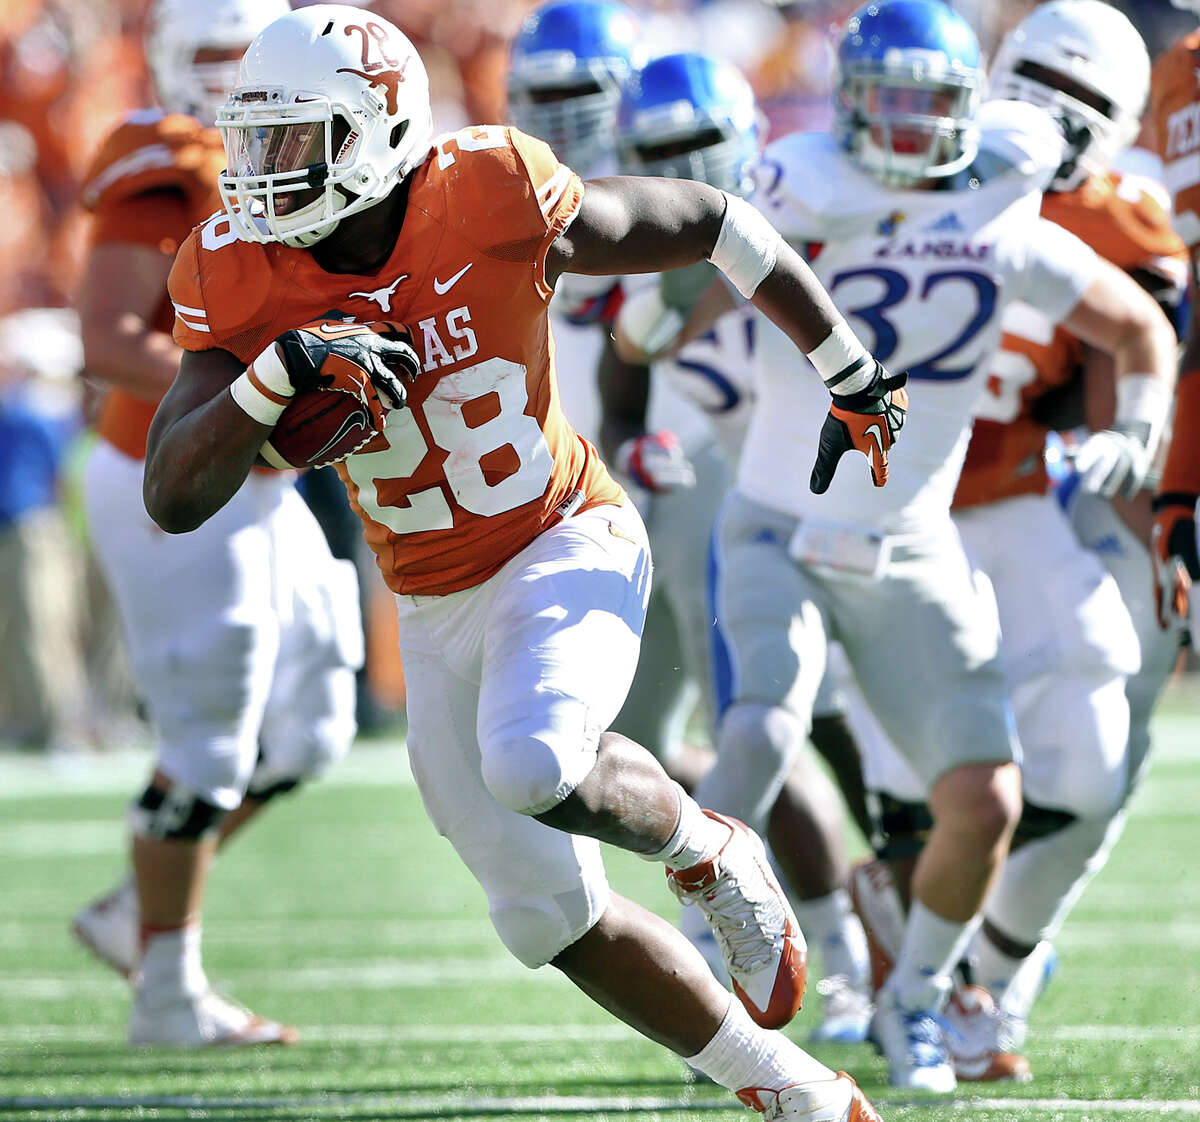 Malcom Brown breaks to the open field in the first half as Texas hosts Kansas at Darrell K. Royal Stadium on November 2, 2013.